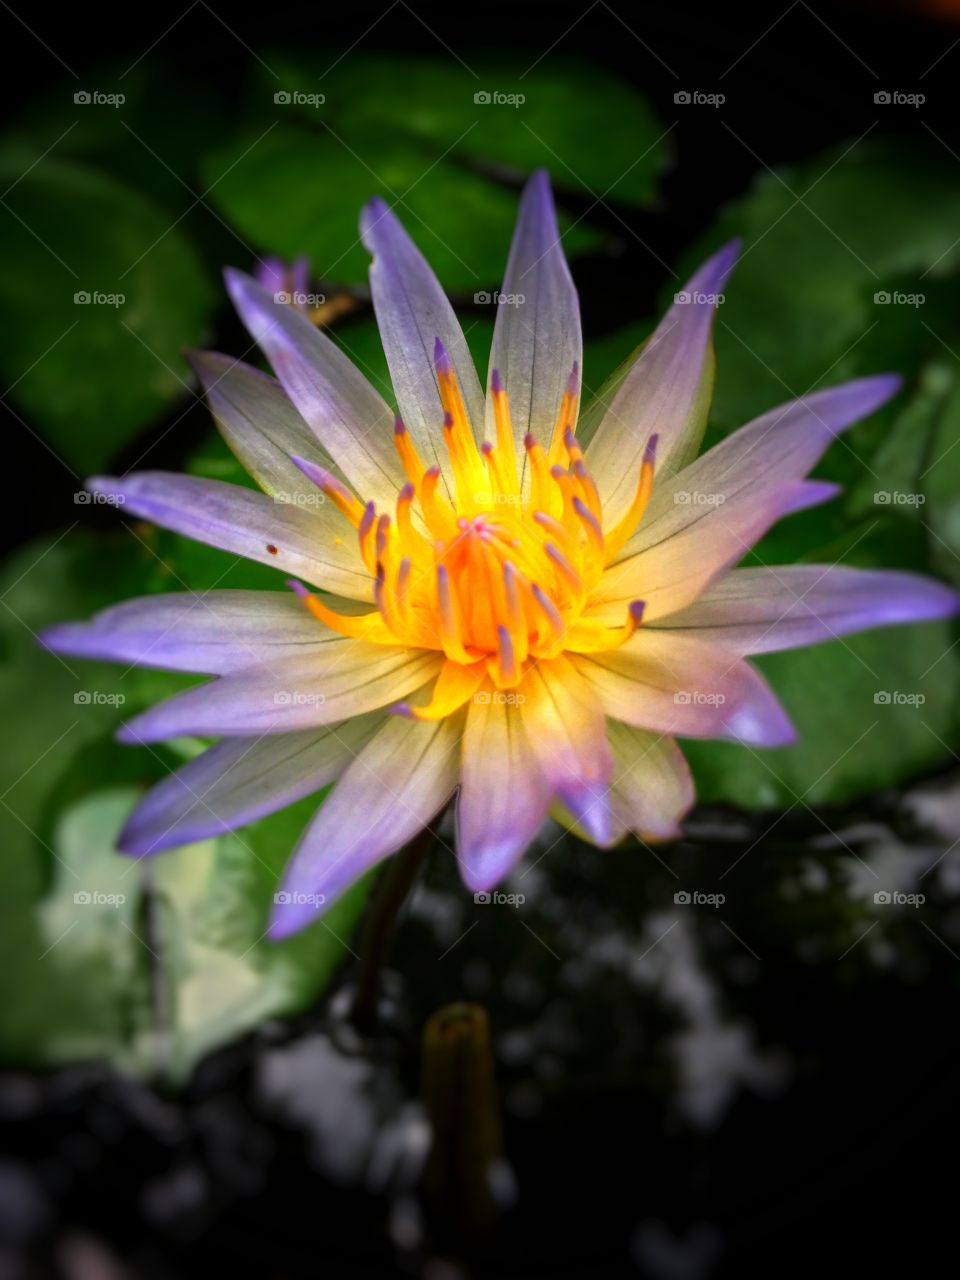 The contrasting, beautiful lotus gliding on the pond.